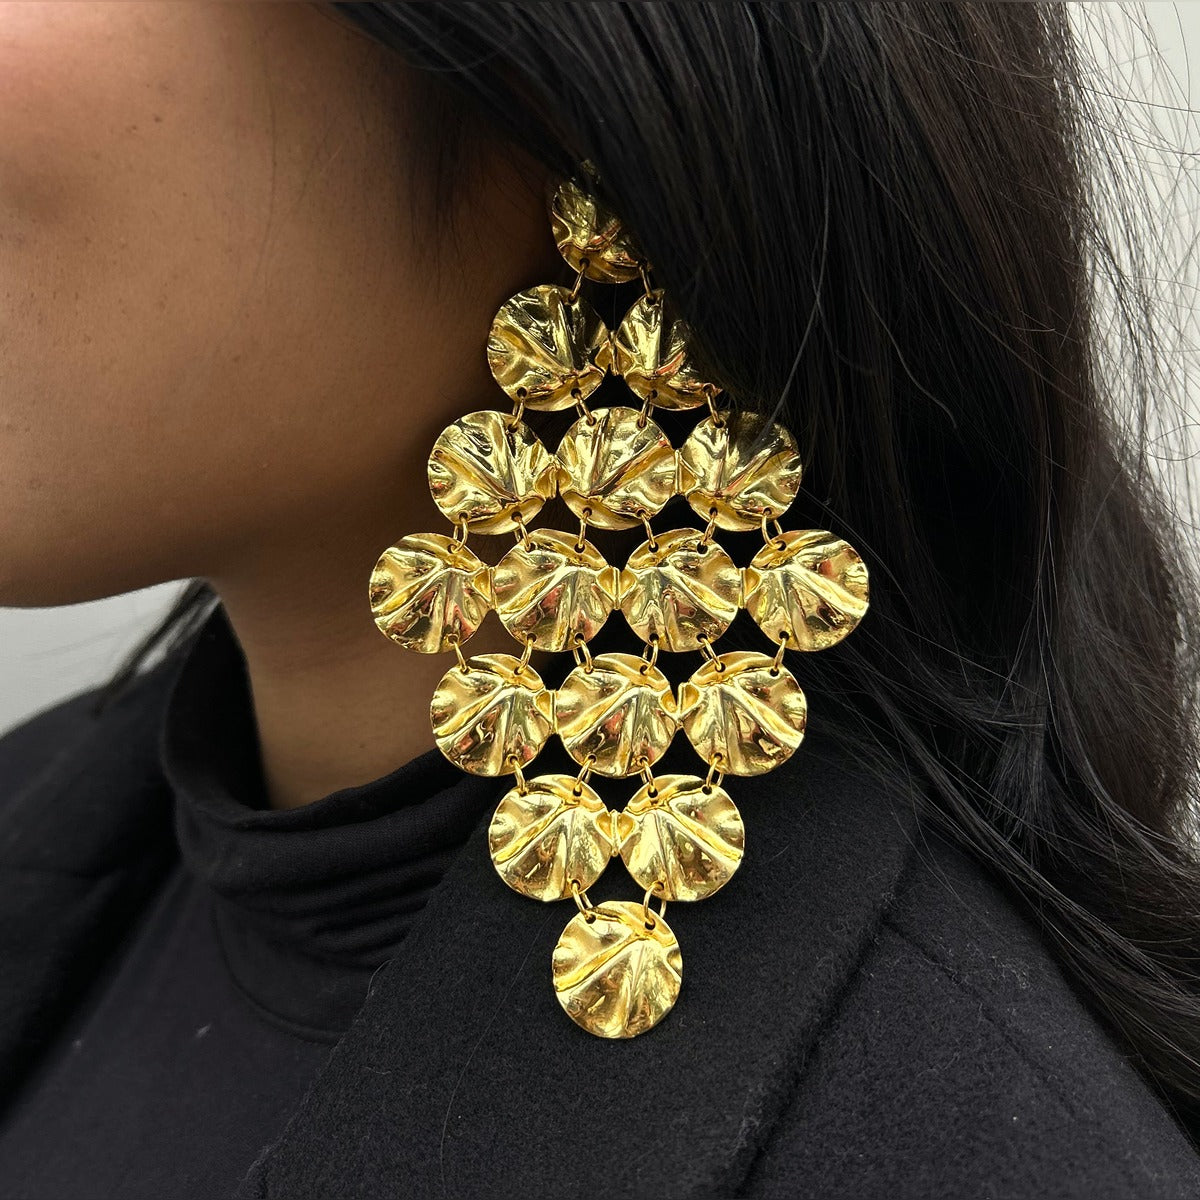 Mitali Jain Dianna Rose Gold Statement Earrings 31.3 g Online in India, Buy  at Best Price from Firstcry.com - 13889191